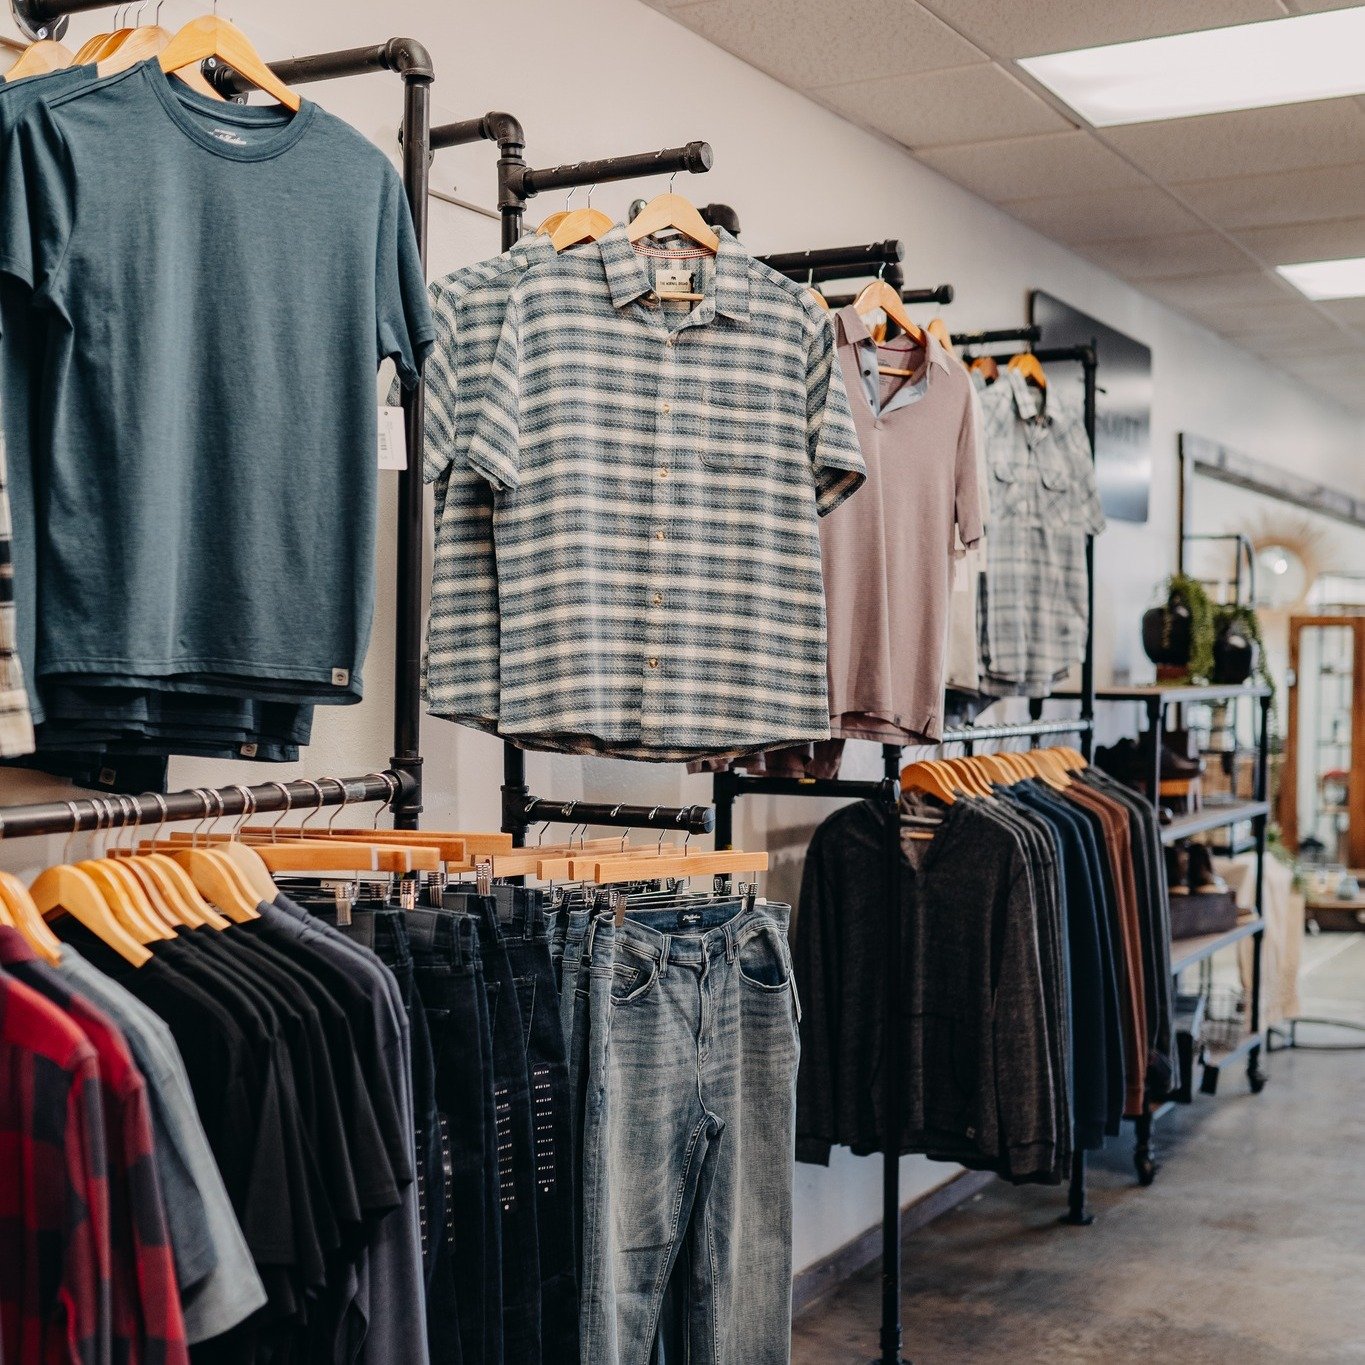 Your new favorite place to shop for Men's Apparel! High quality brands, great styles, and our style experts will help you put it all together! 😎

Visit us this weekend to check it out! 

#johnscottapparel #downtoearthshops #eauclaire #mensapparel